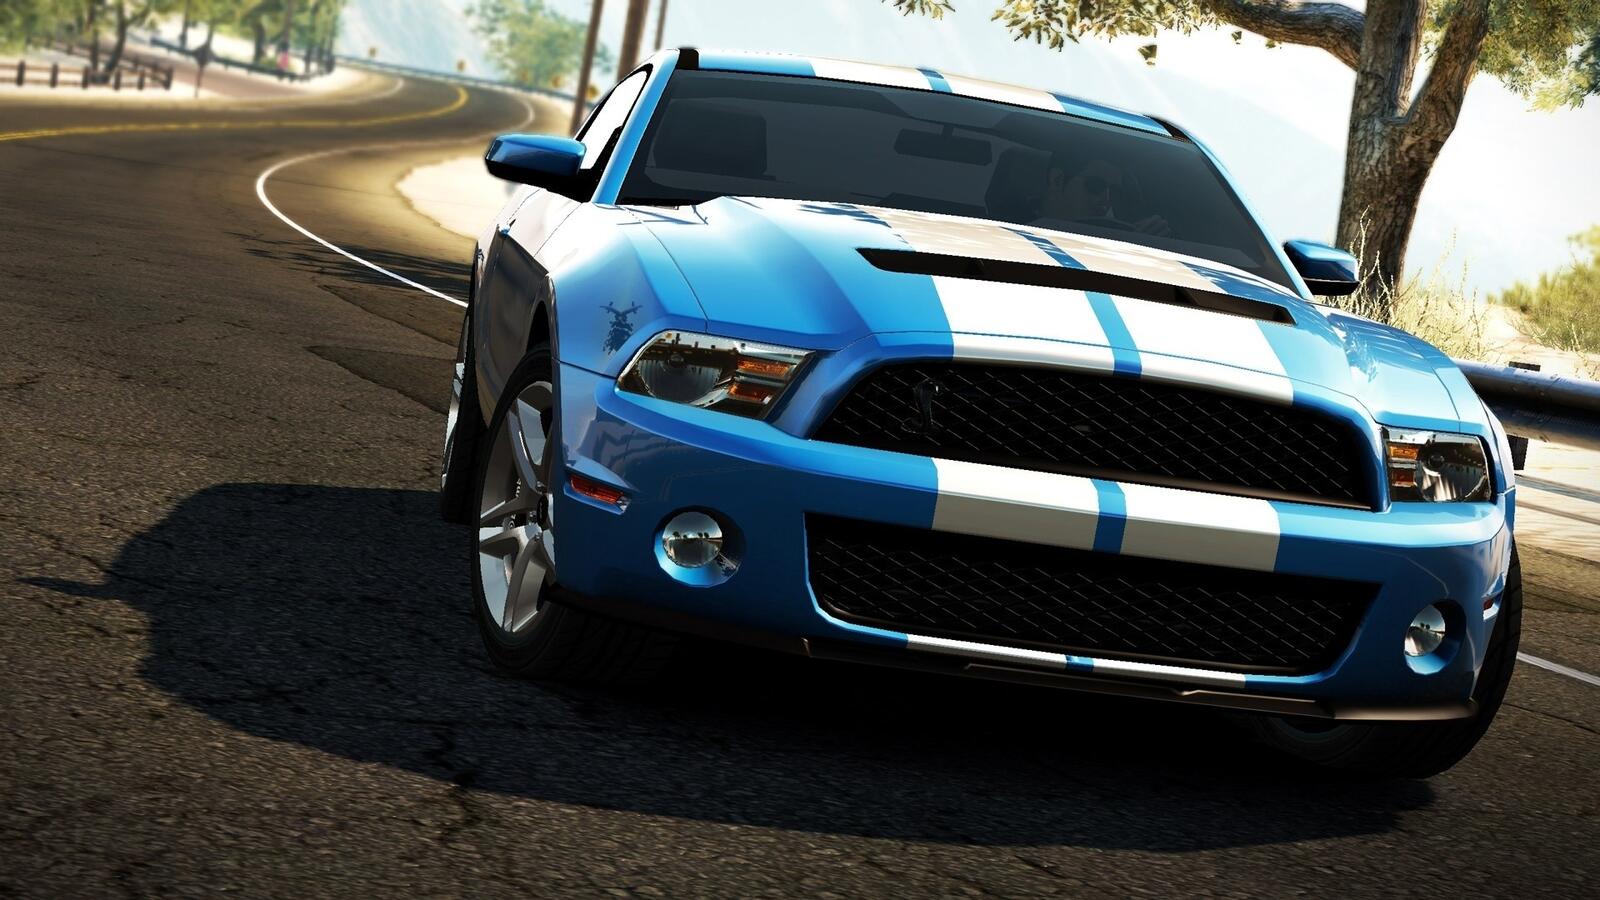 Free photo The blue Shelby mustang from the game